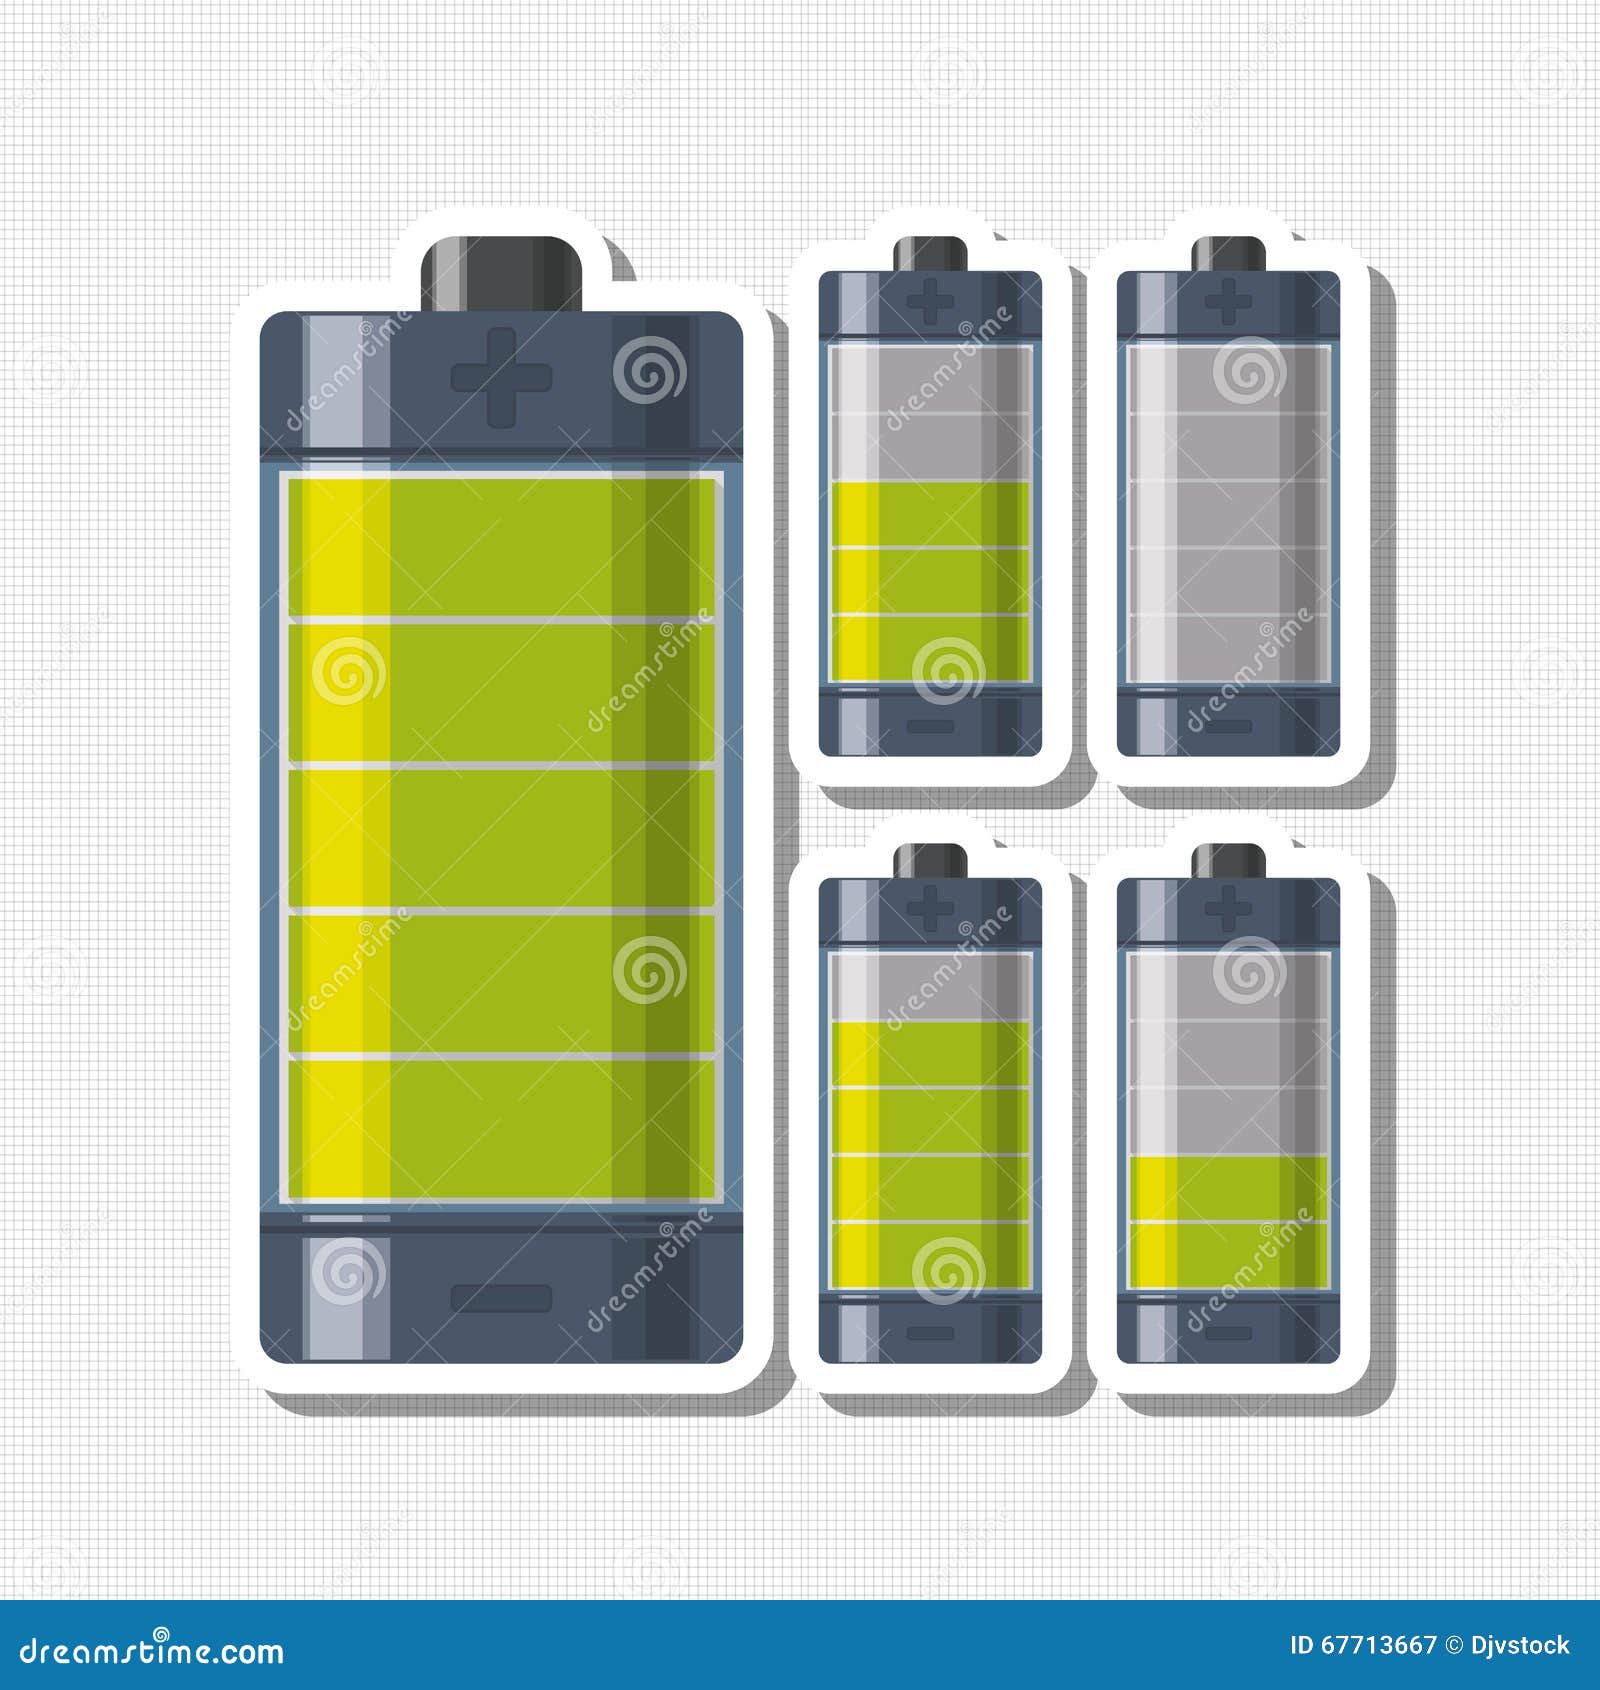 Battery design. Защитные стёкла Battery collection. Дизайн аккумулятора. Battery High Voltage, long Battery charge and Energy, vector illustration. Battery illustration Design.